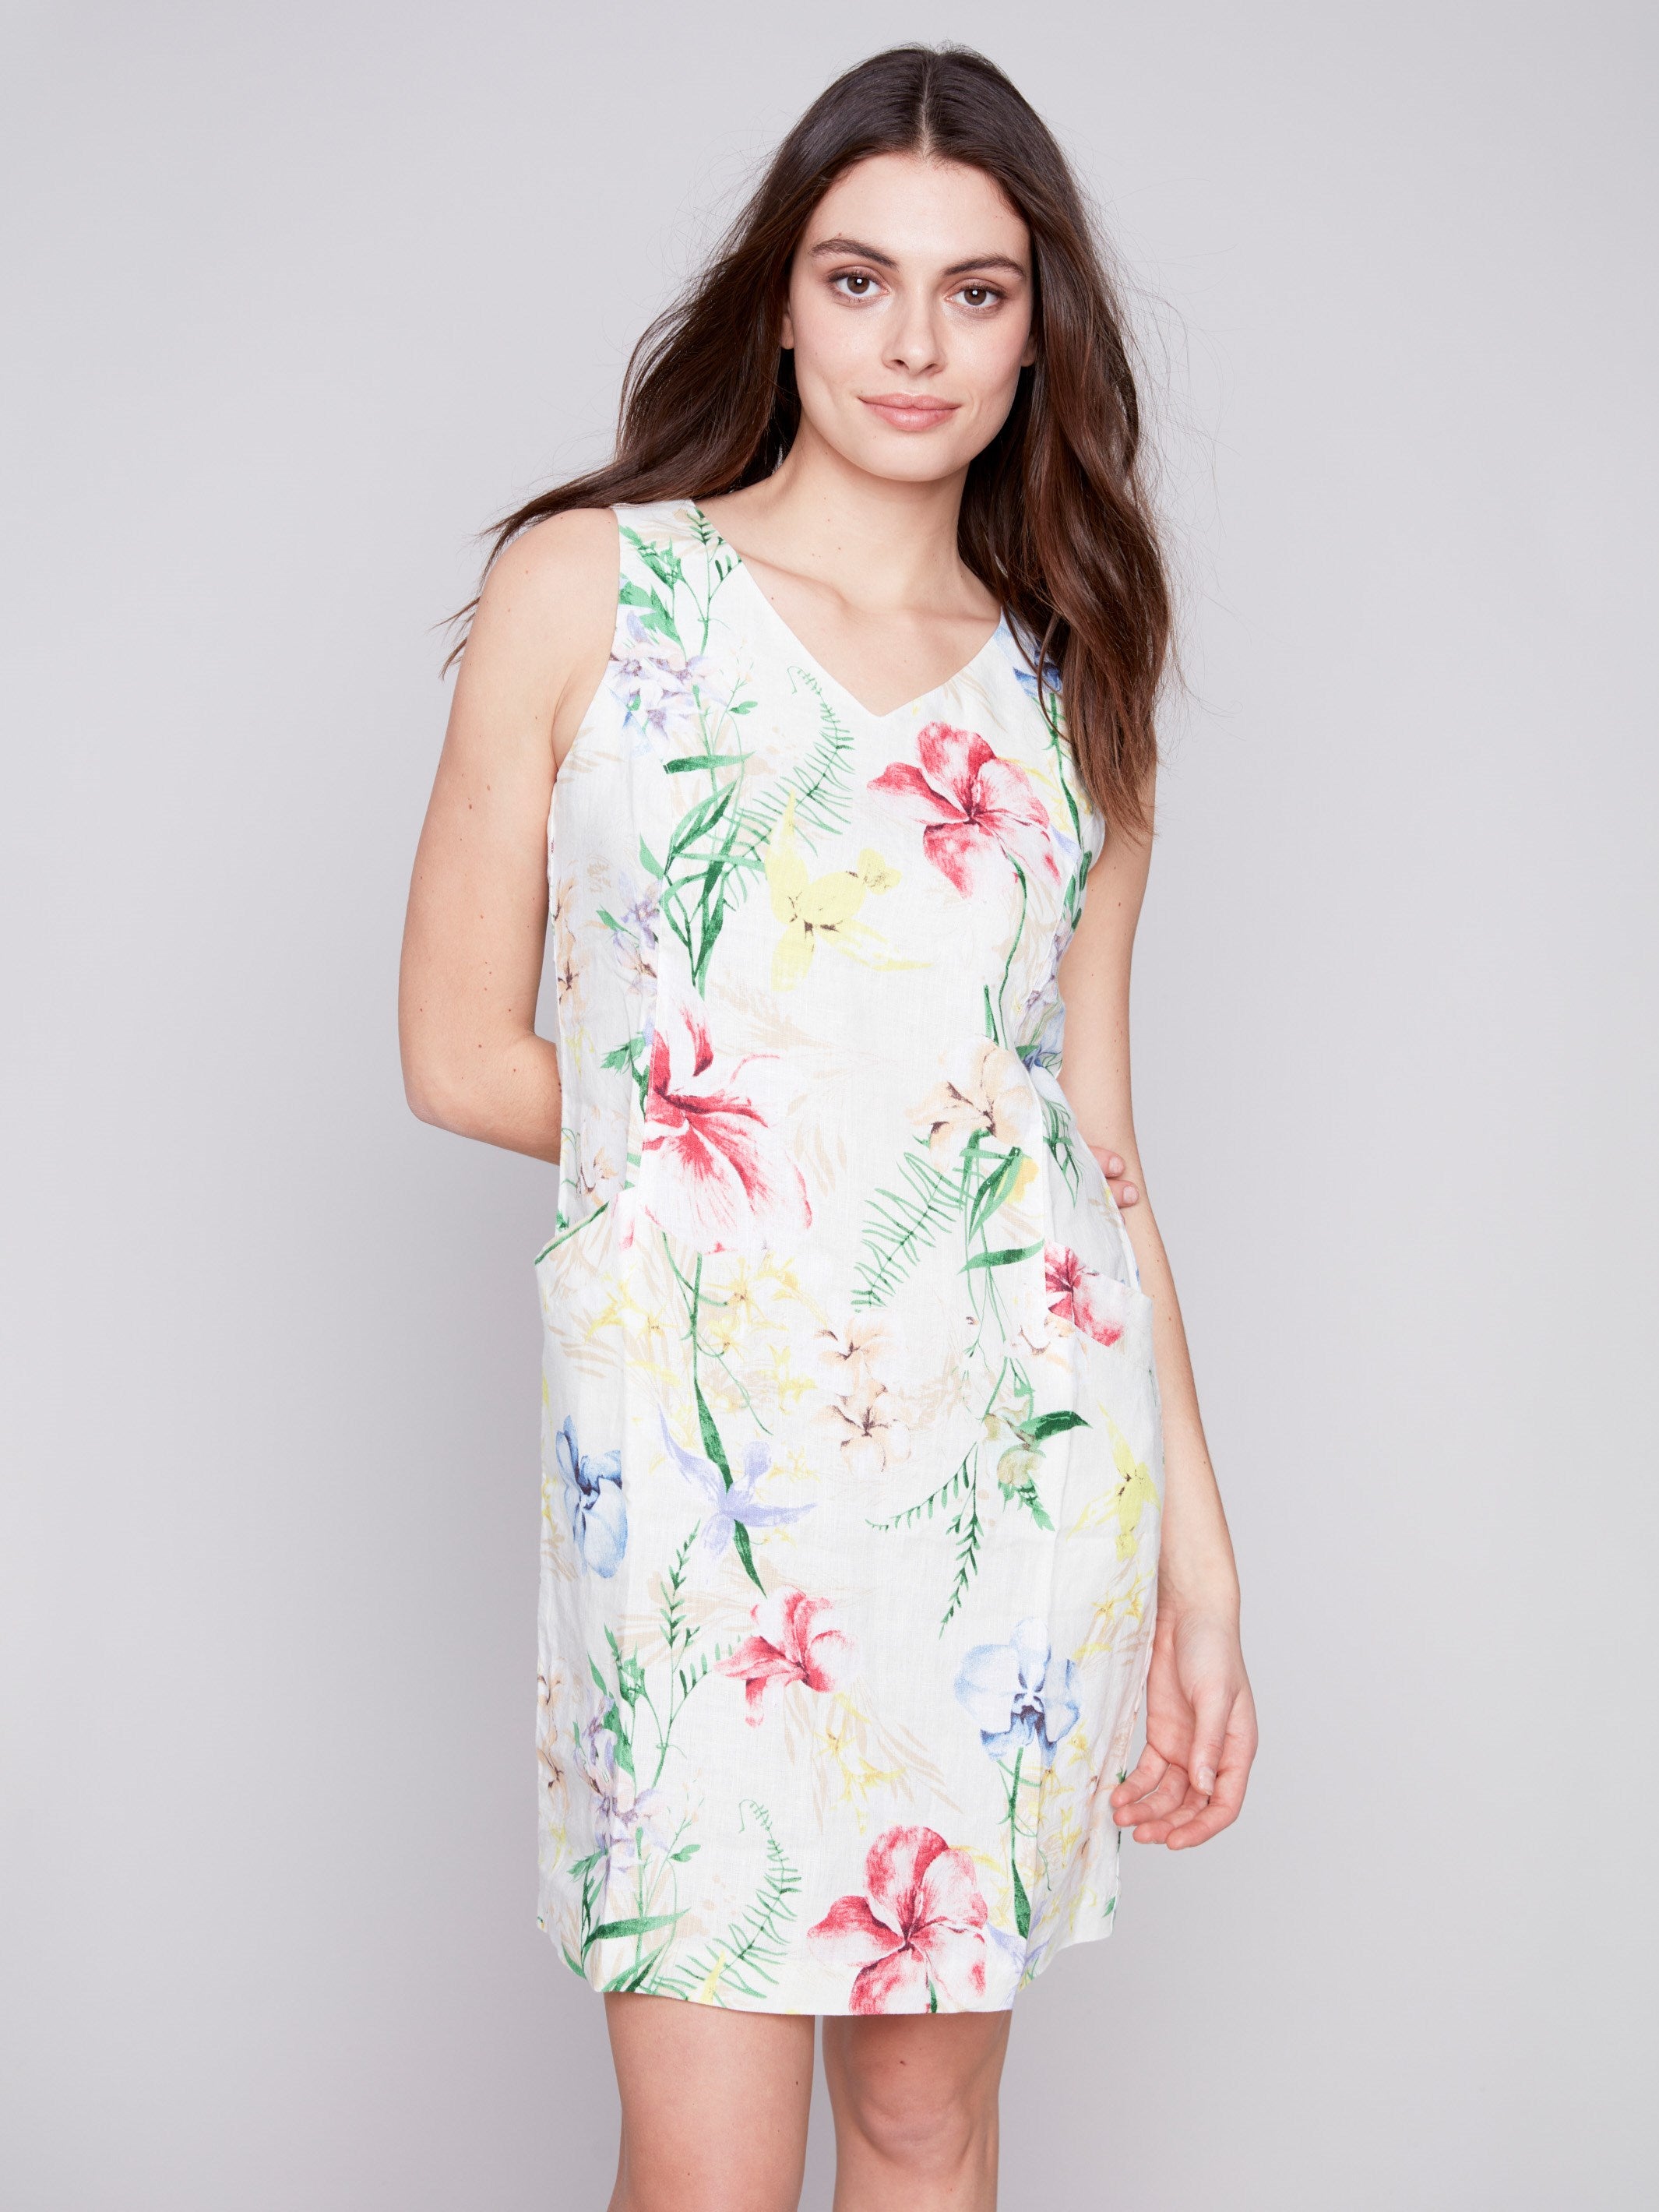 Sleeveless Printed Linen Dress - Wildflower - Charlie B Collection Canada - Image 1